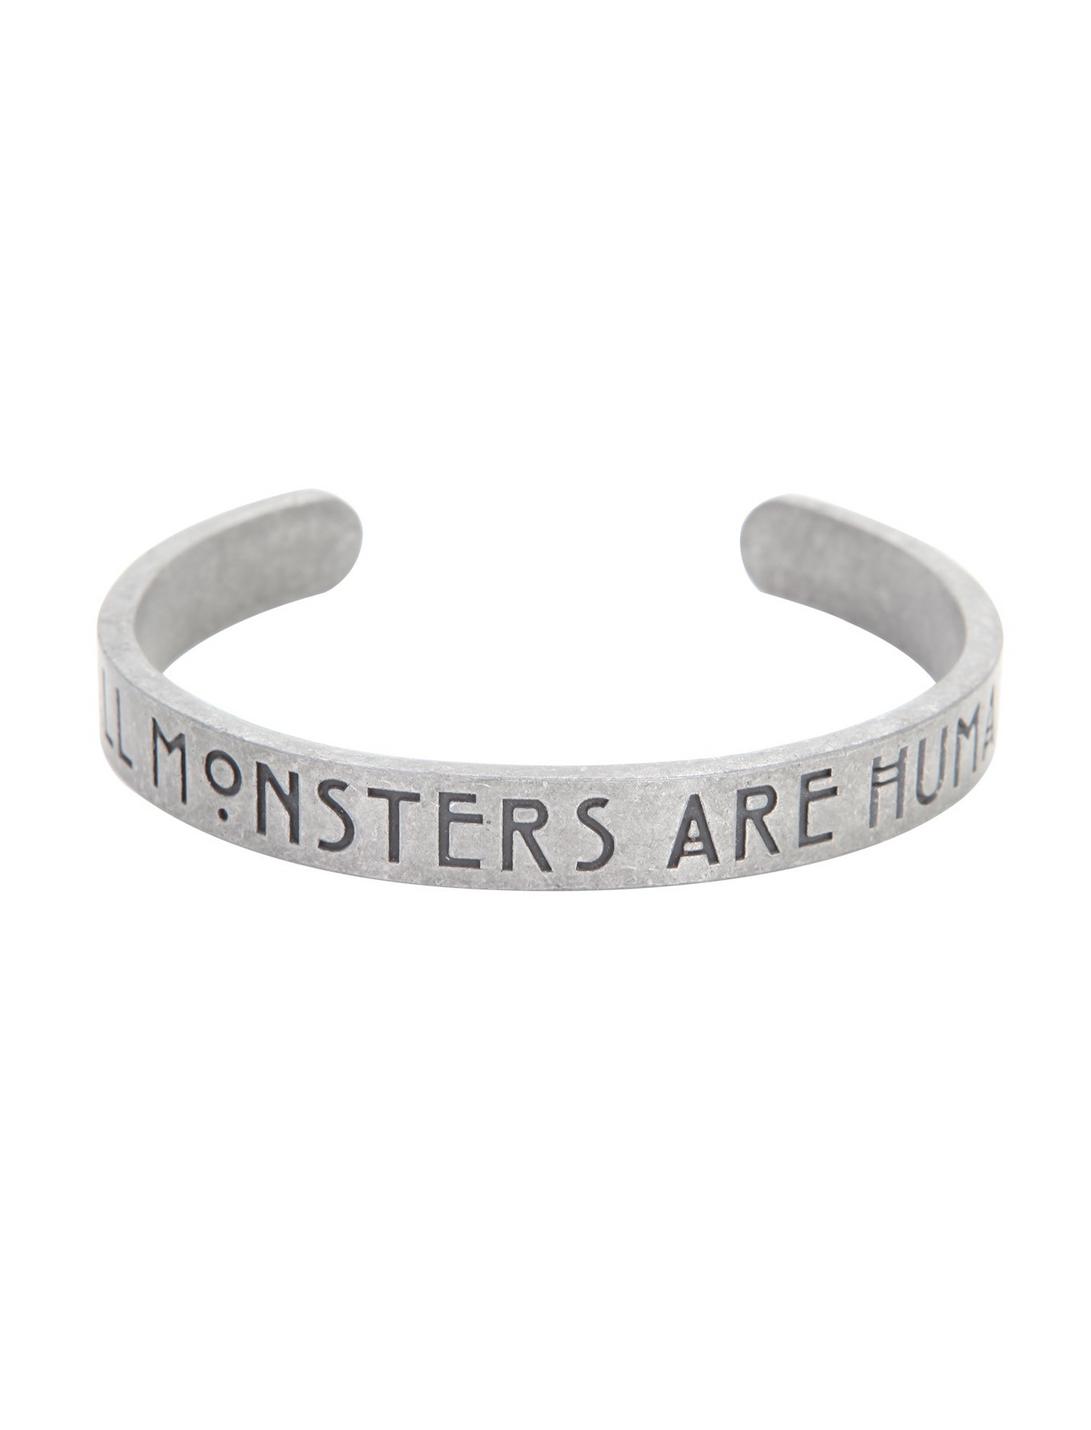 American Horror Story All Monsters Are Human Bracelet, , hi-res